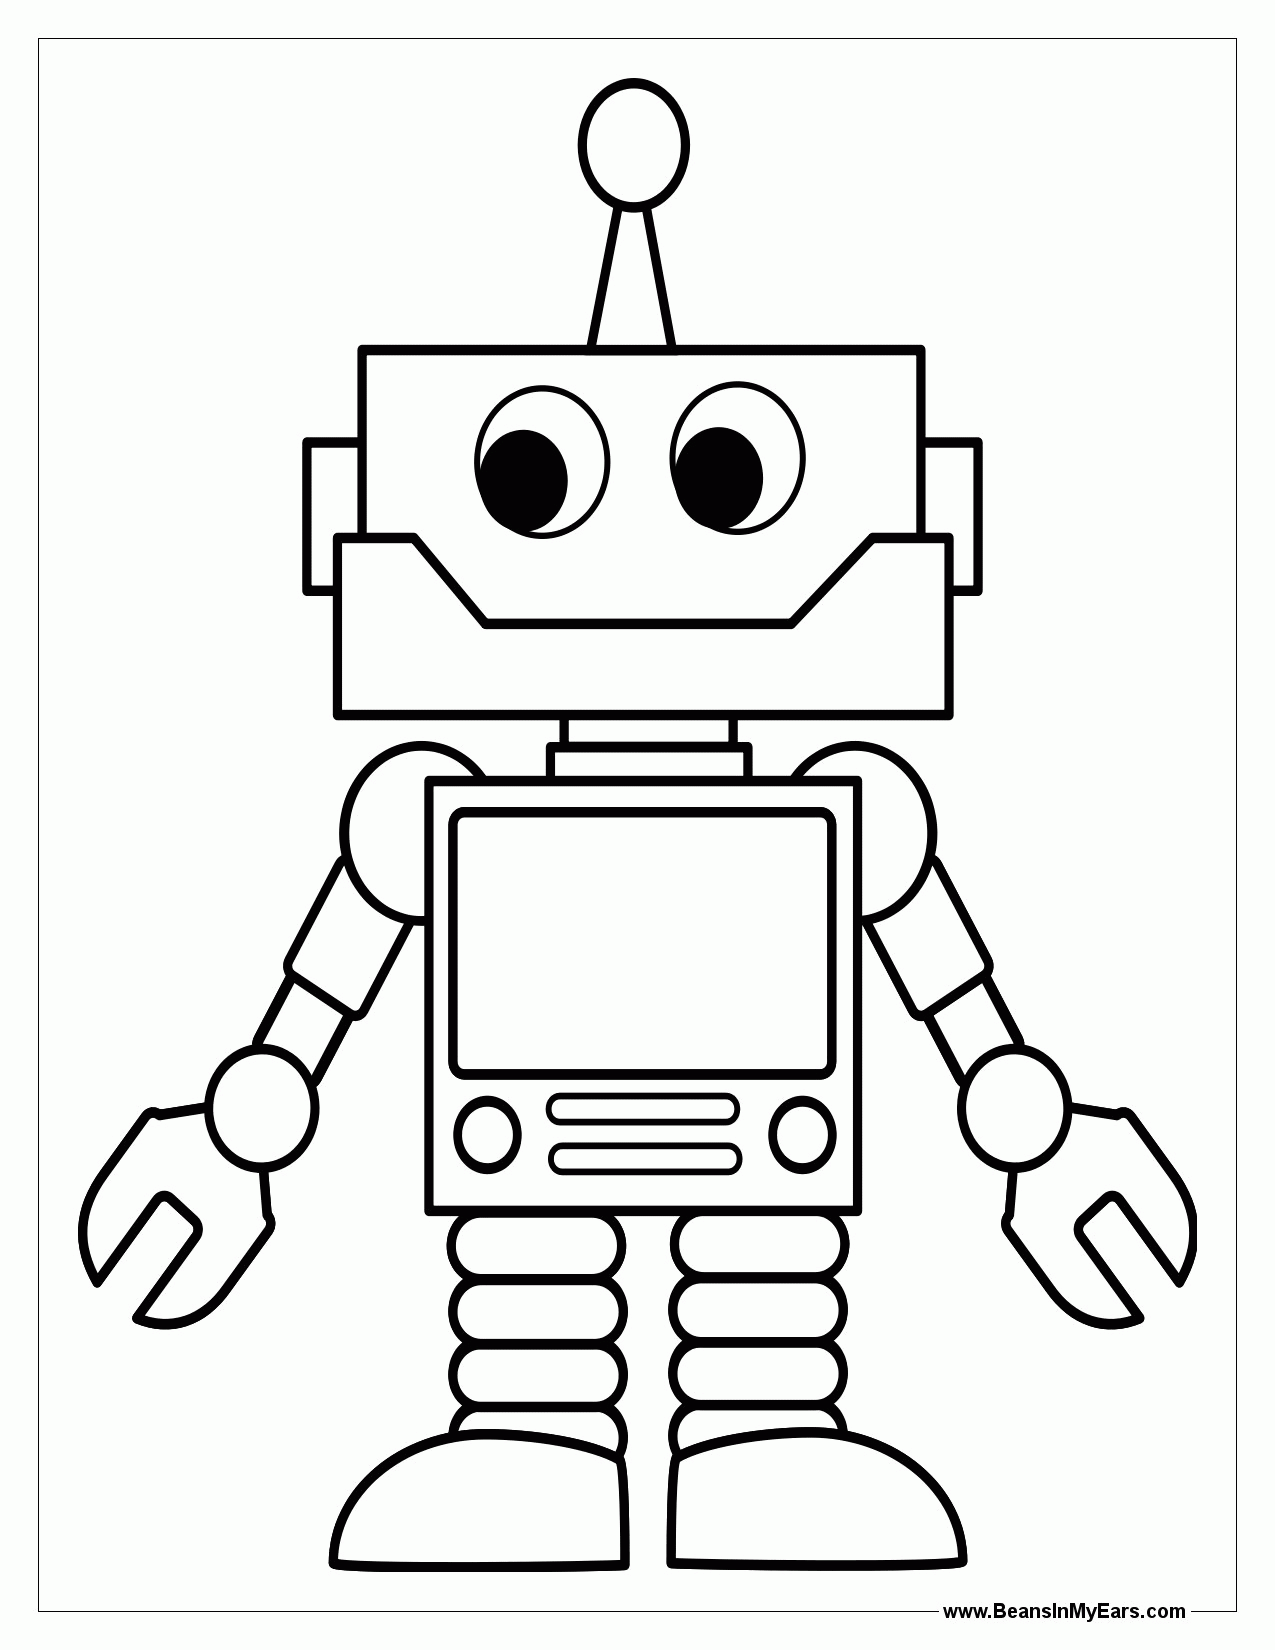 Animated Robot Coloring Pages - Coloring Pages For All Ages